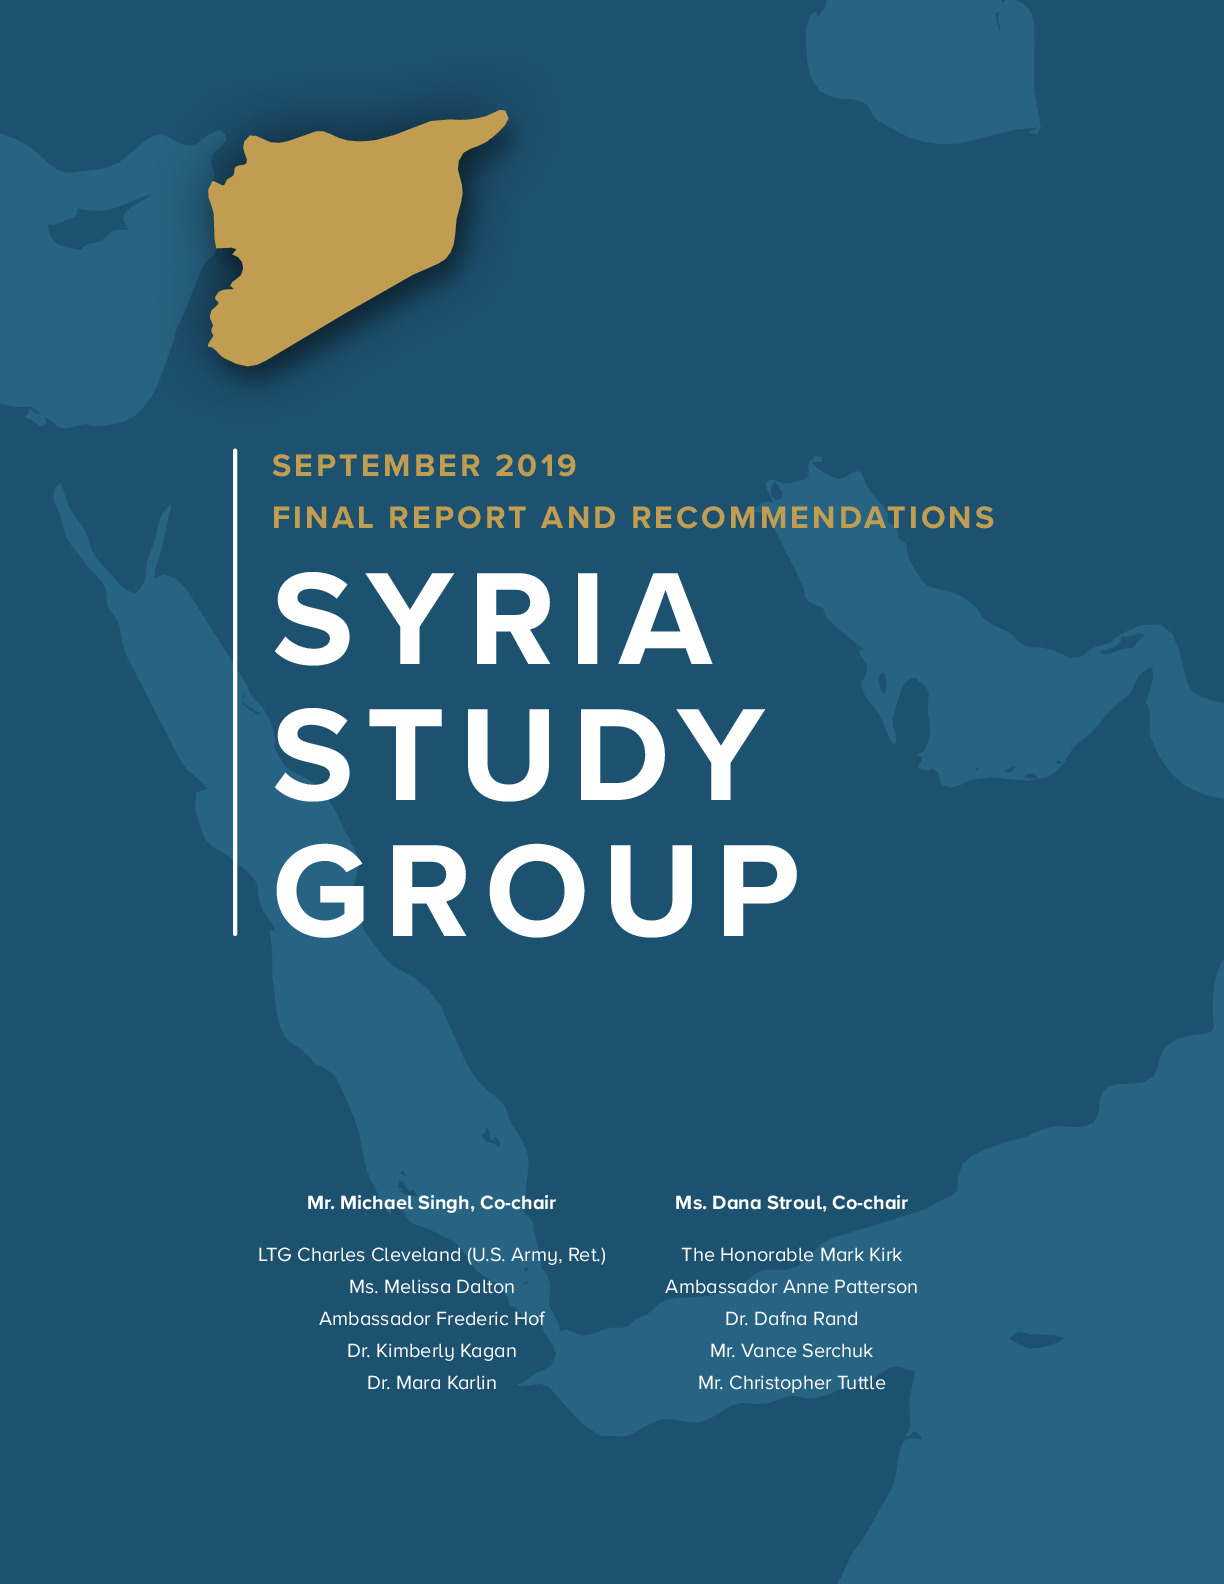 Syria-Study-Group-final-report-2019.pdf